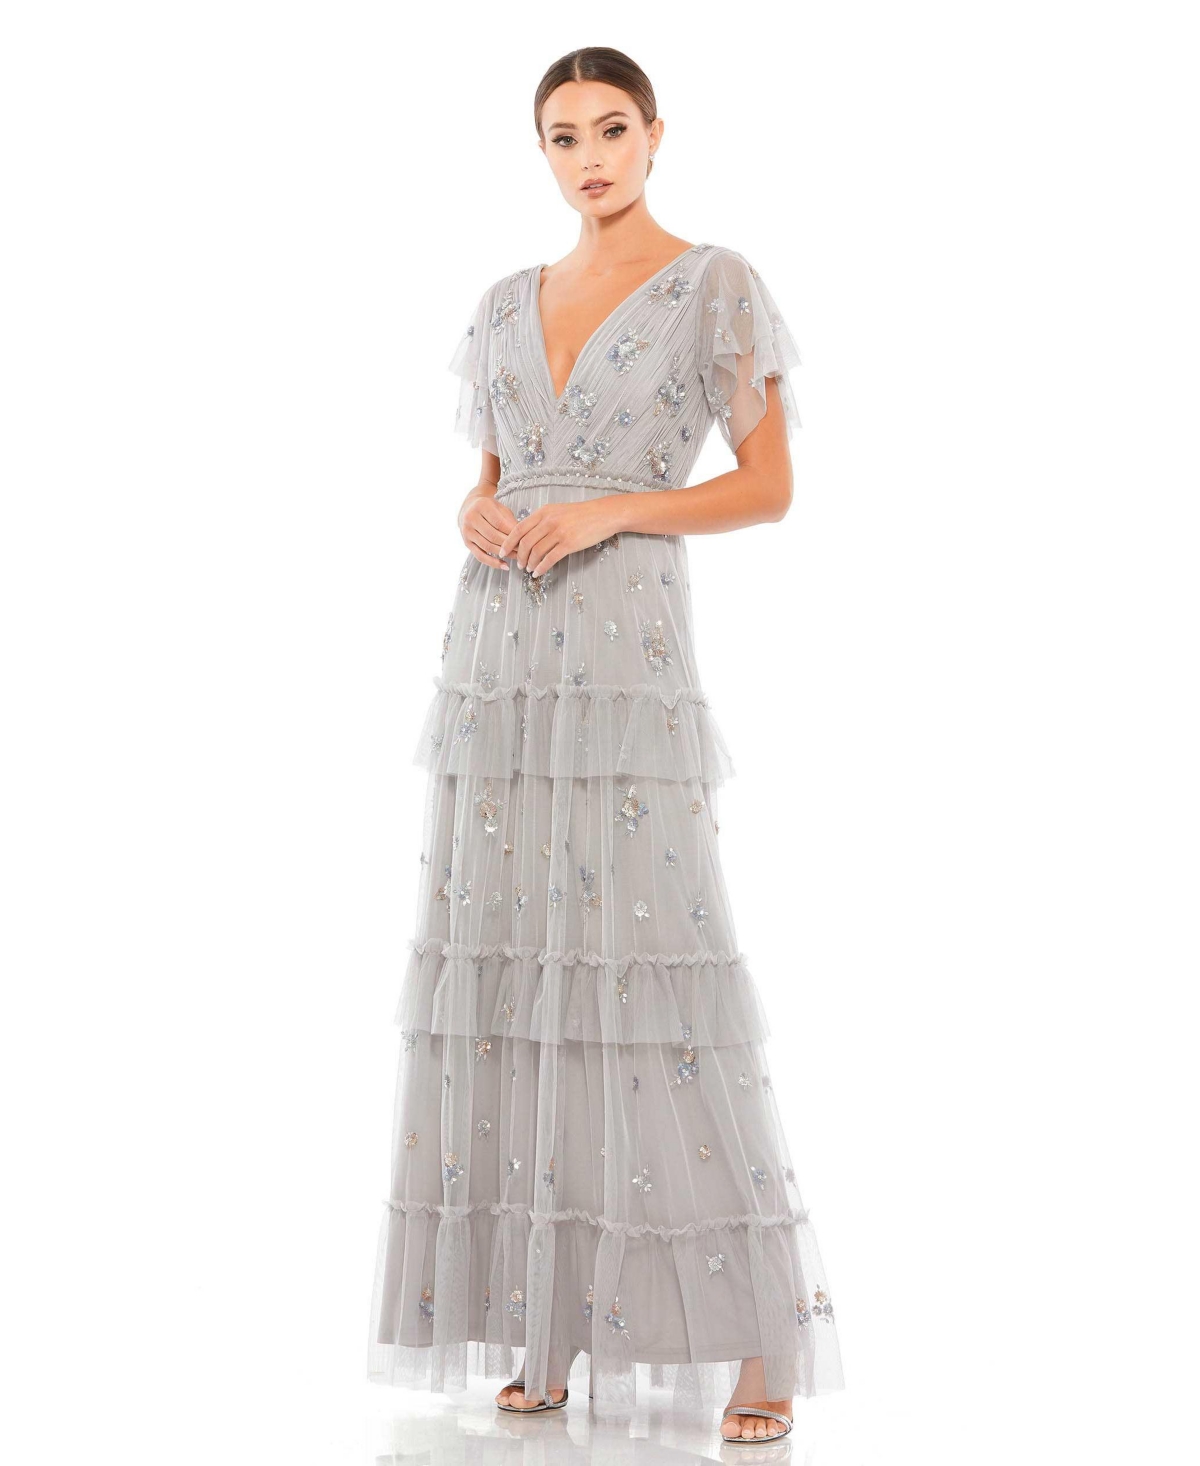 Great Gatsby Dress – Great Gatsby Dresses for Sale Womens Ruffle Tiered Embellished Flutter Sleeve Gown - Platinum $598.00 AT vintagedancer.com